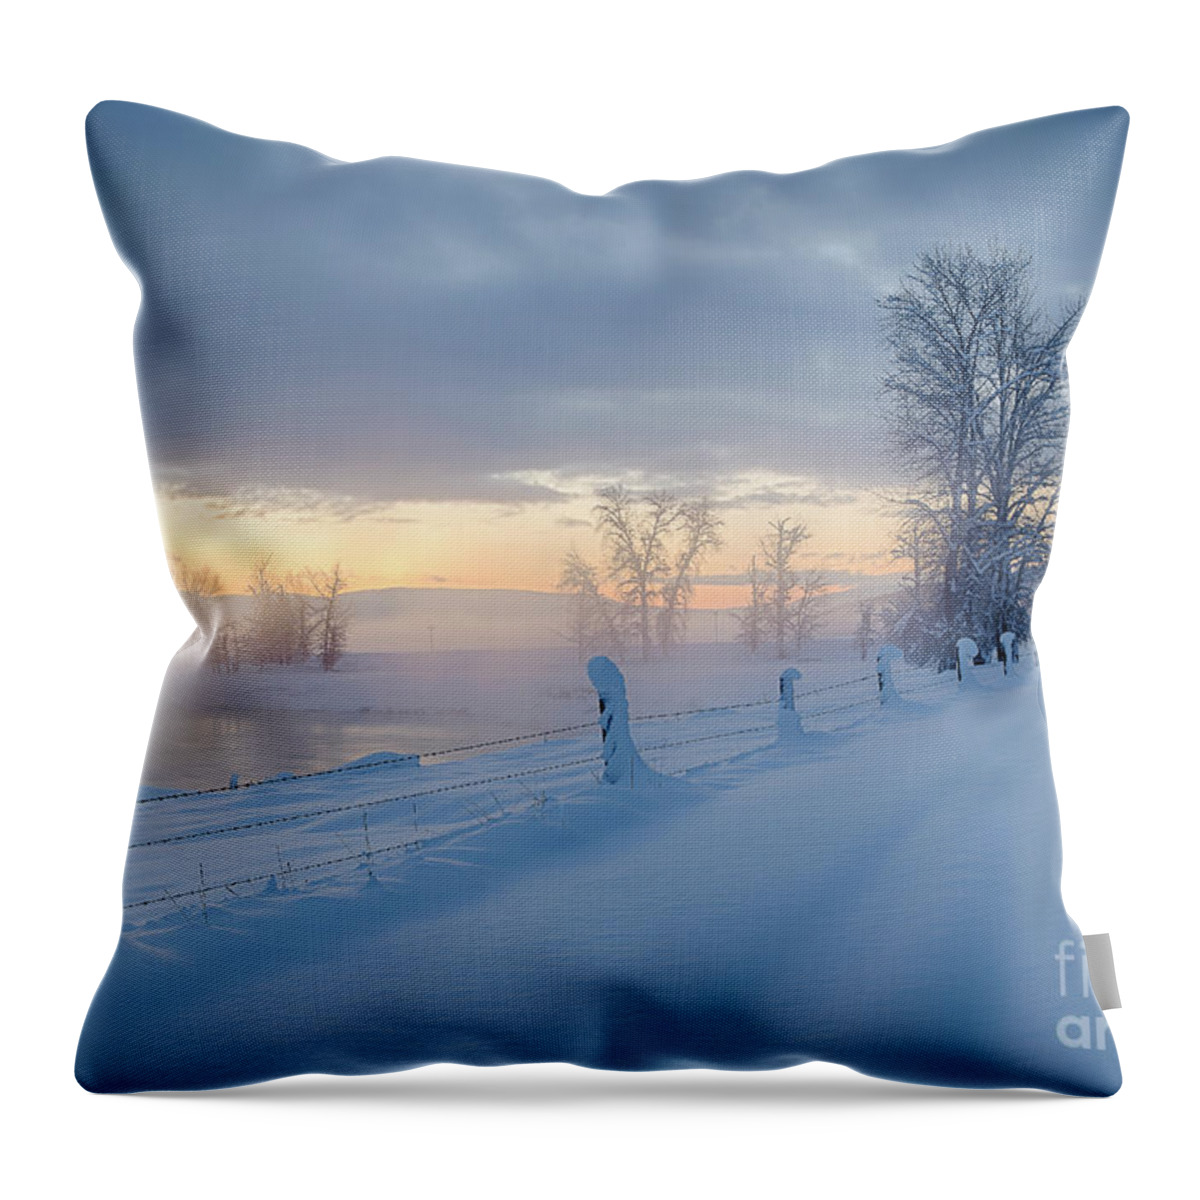 December Throw Pillow featuring the photograph Kootenai River Road by Idaho Scenic Images Linda Lantzy